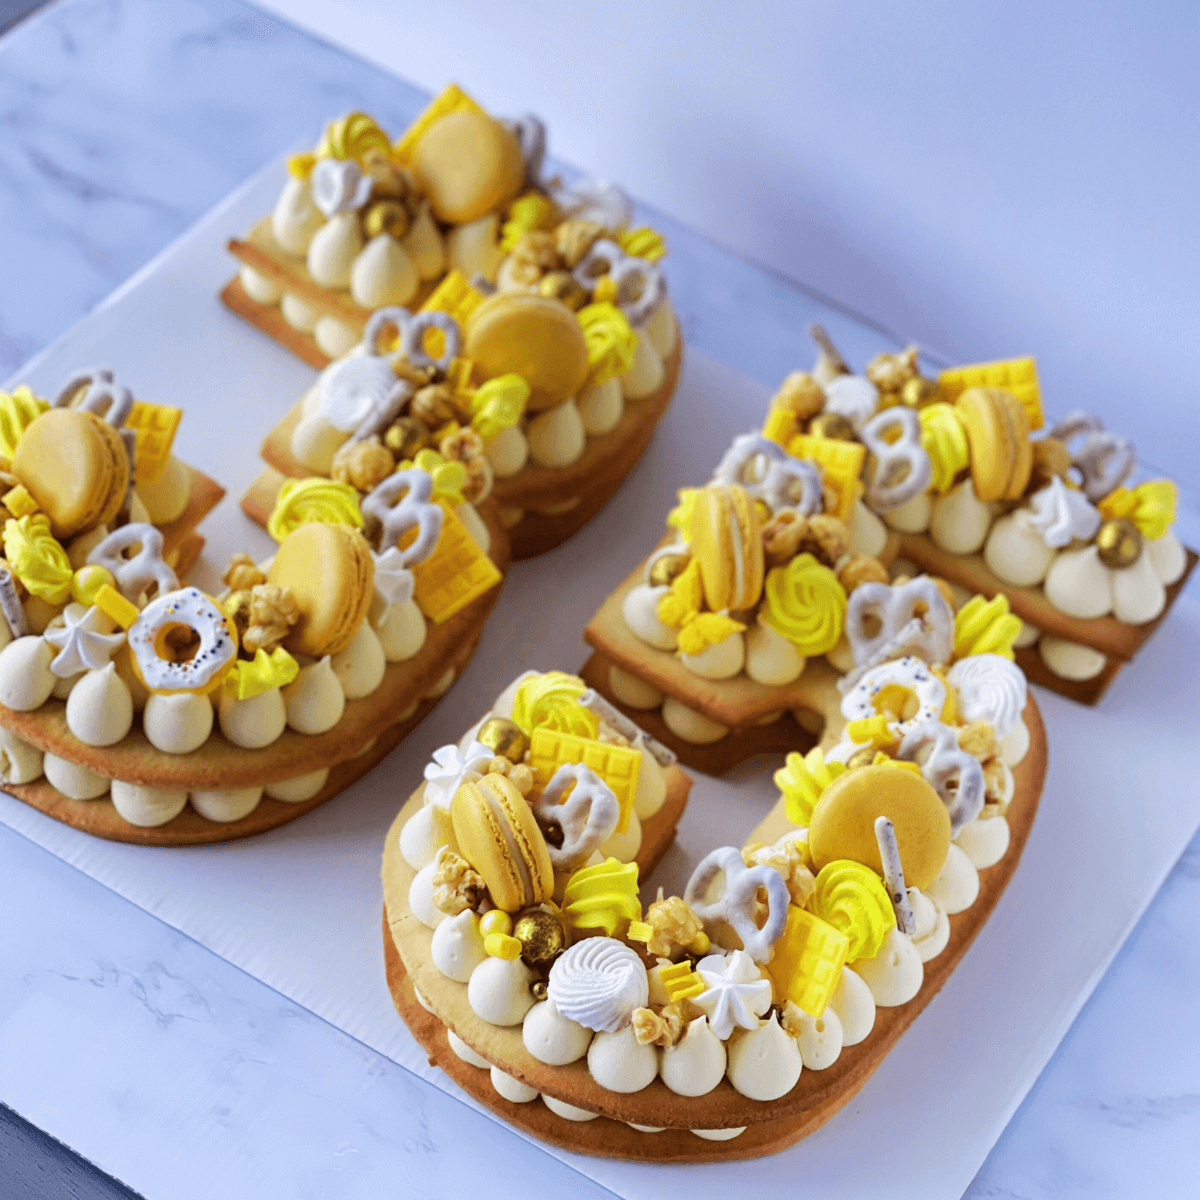 Letter/Number Cakes – Sweet Grace SA